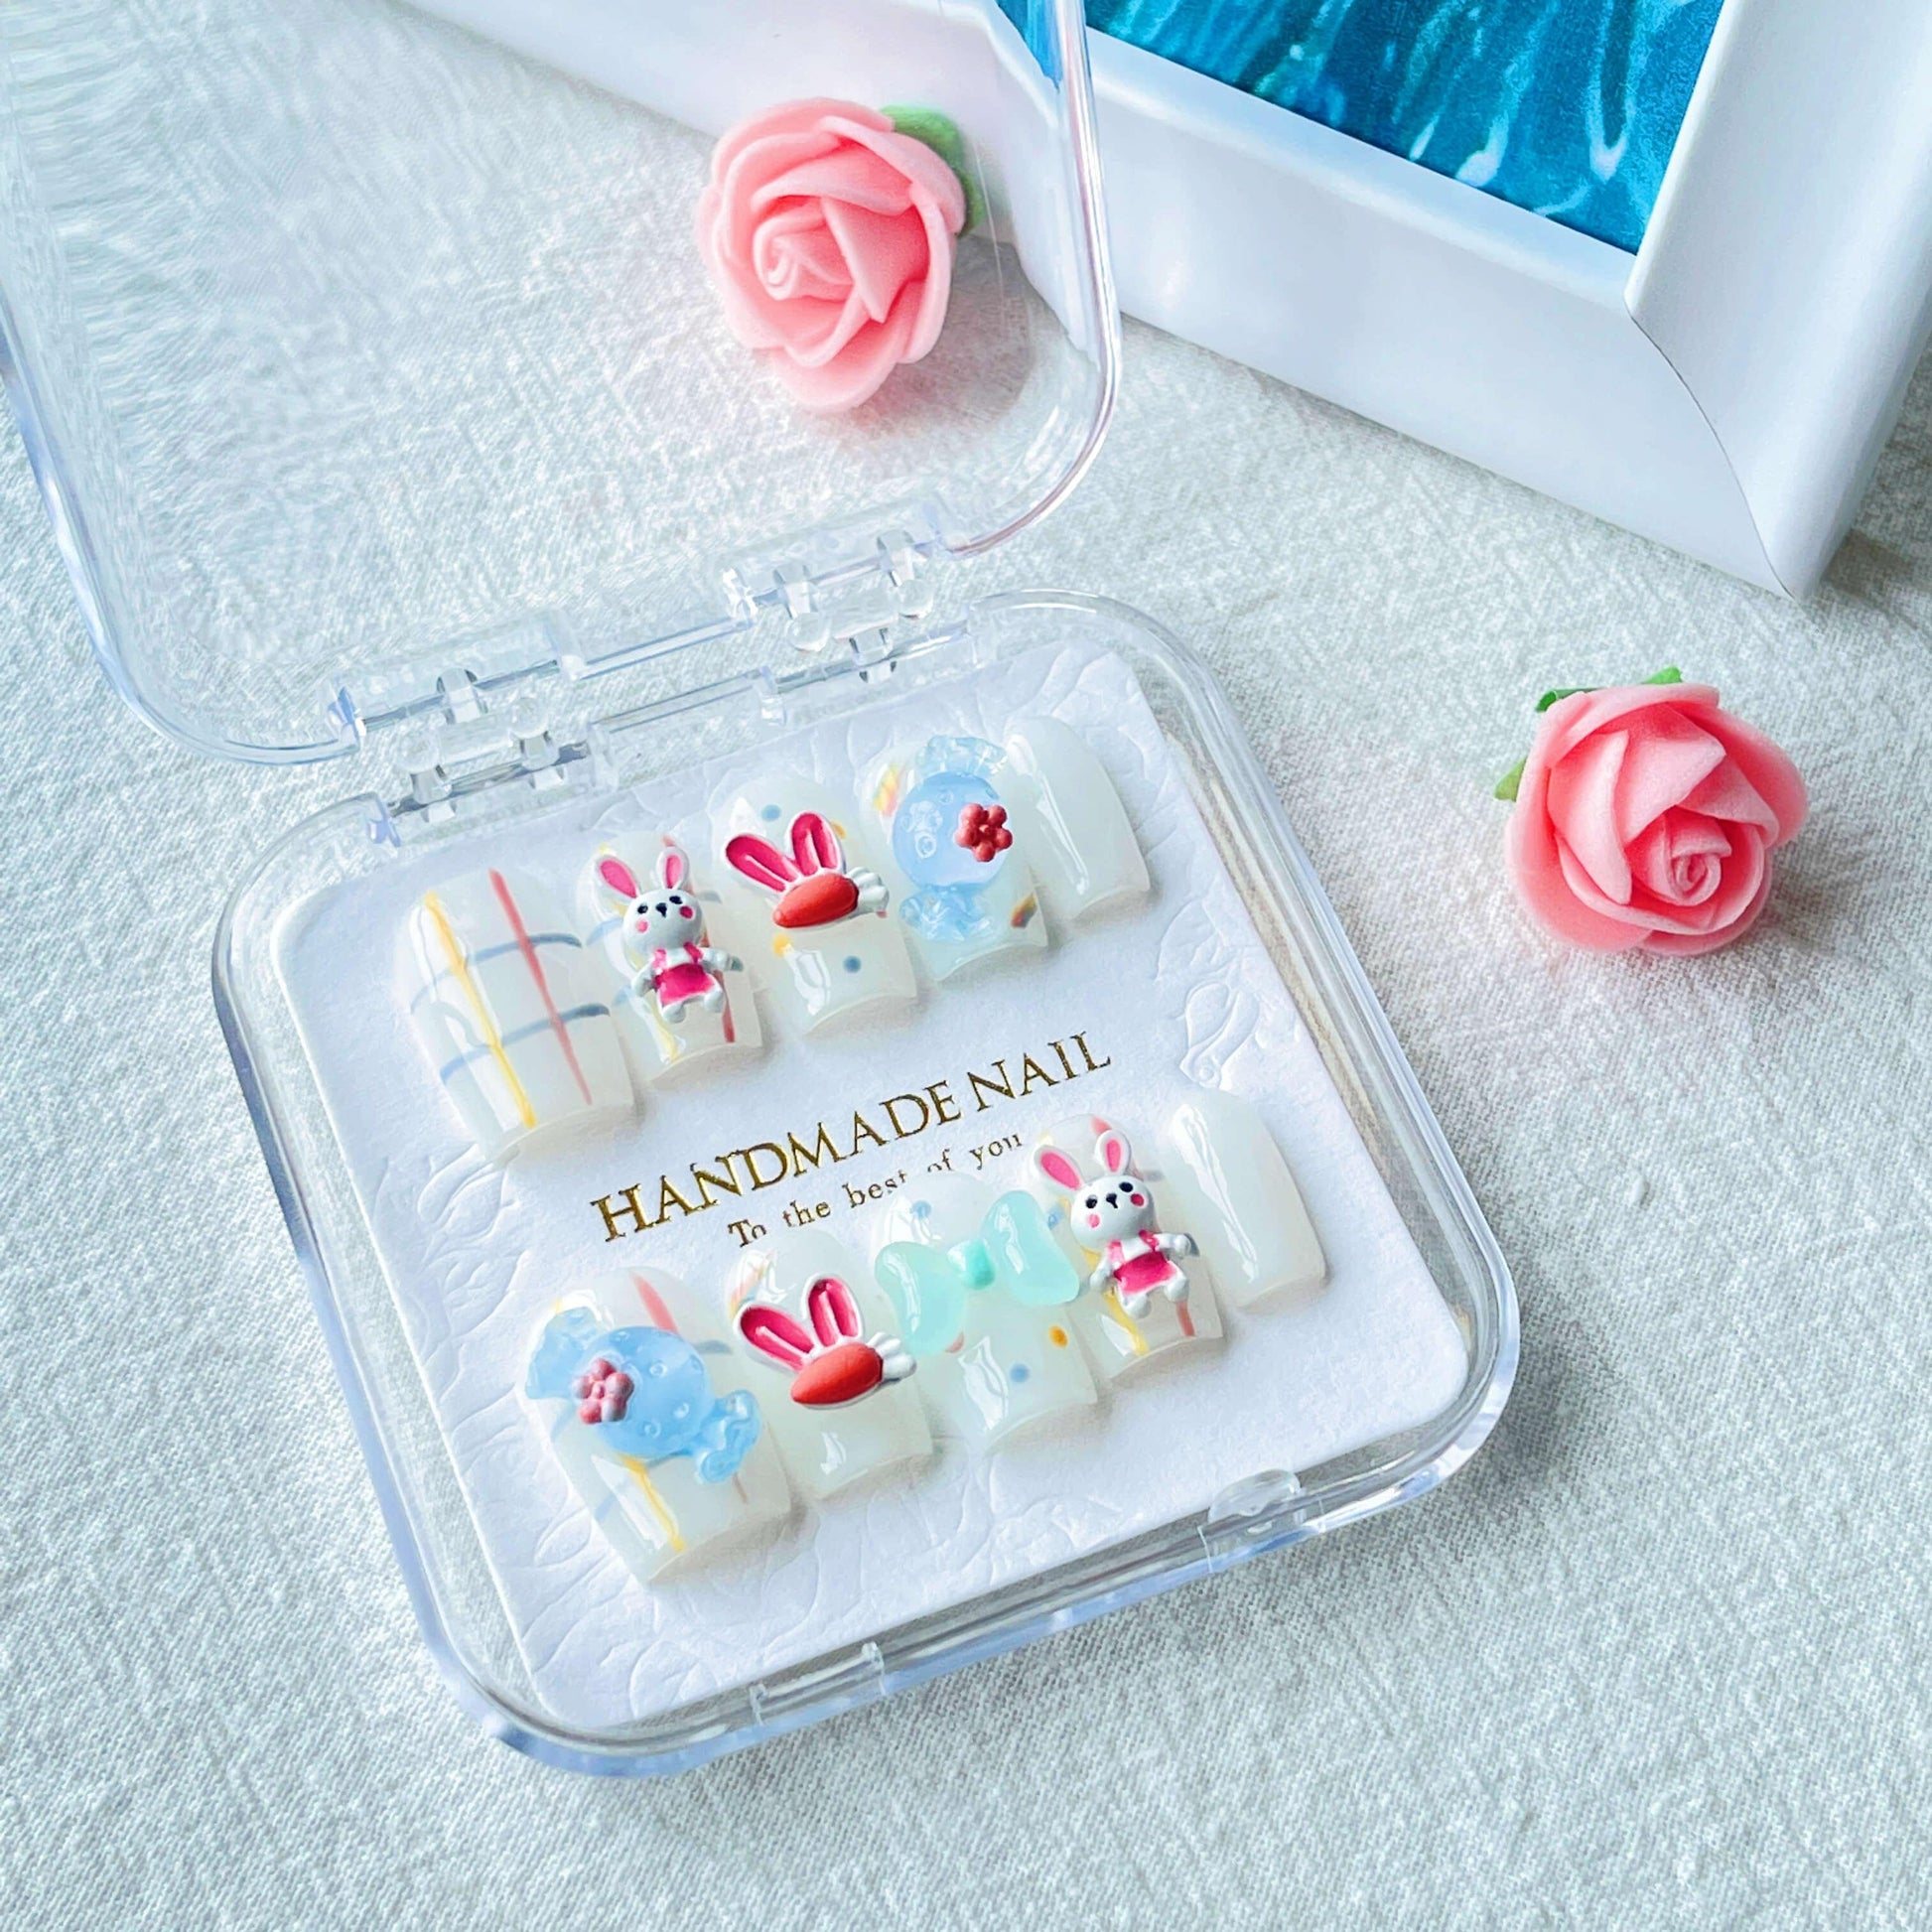 [HANDMADE] Cute Bunny Rabbit and Candy Medium Short Length Press On Nails-SPECIAL LAUNCH PRICE! - Belle Rose Nails